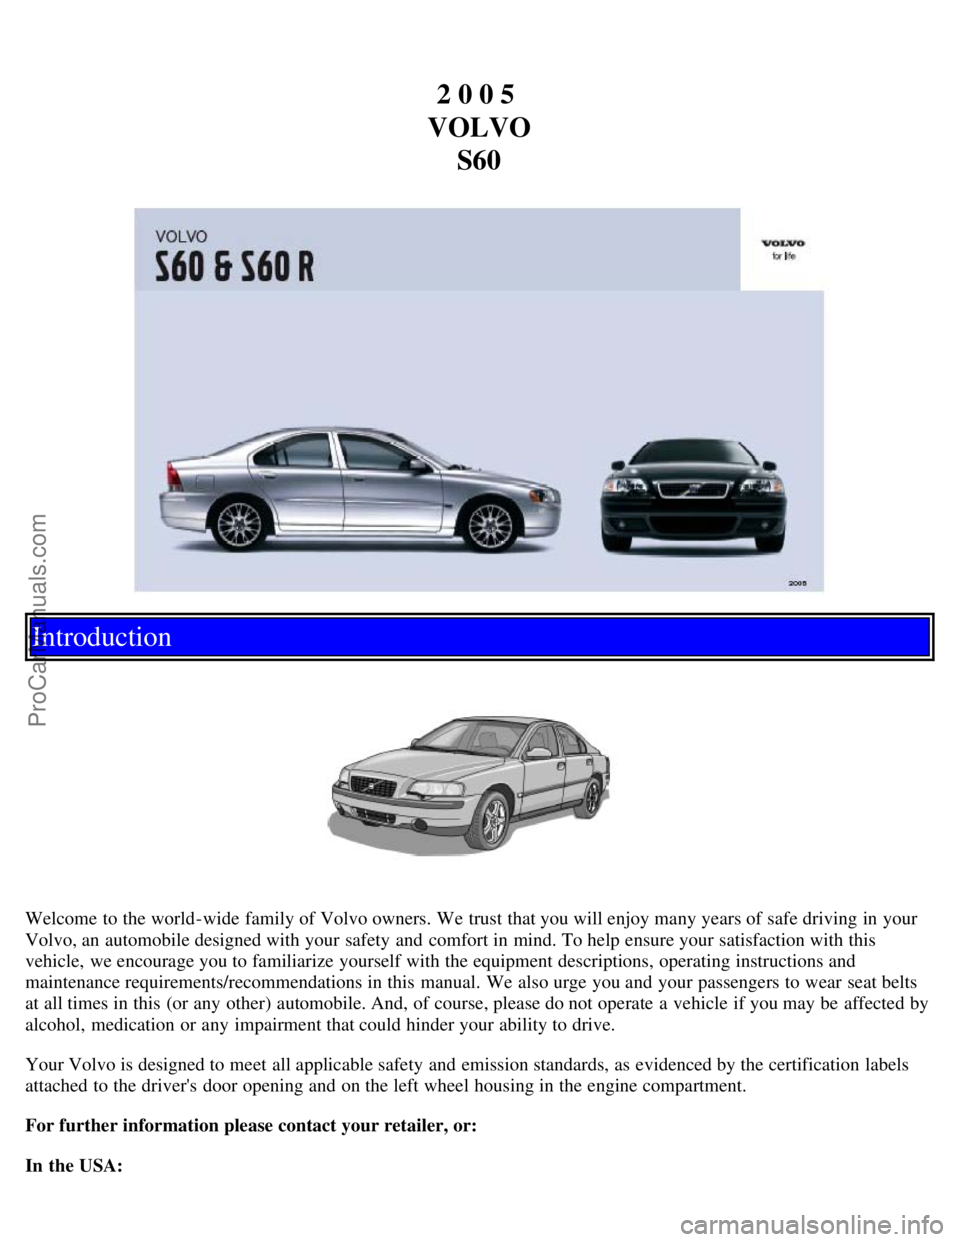 VOLVO S60 2005  Owners Manual 2 0 0 5 
VOLVO S60
Introduction
Welcome to the world-wide  family of Volvo owners. We trust that you will enjoy many years of safe driving in your
Volvo, an  automobile designed with your safety and  